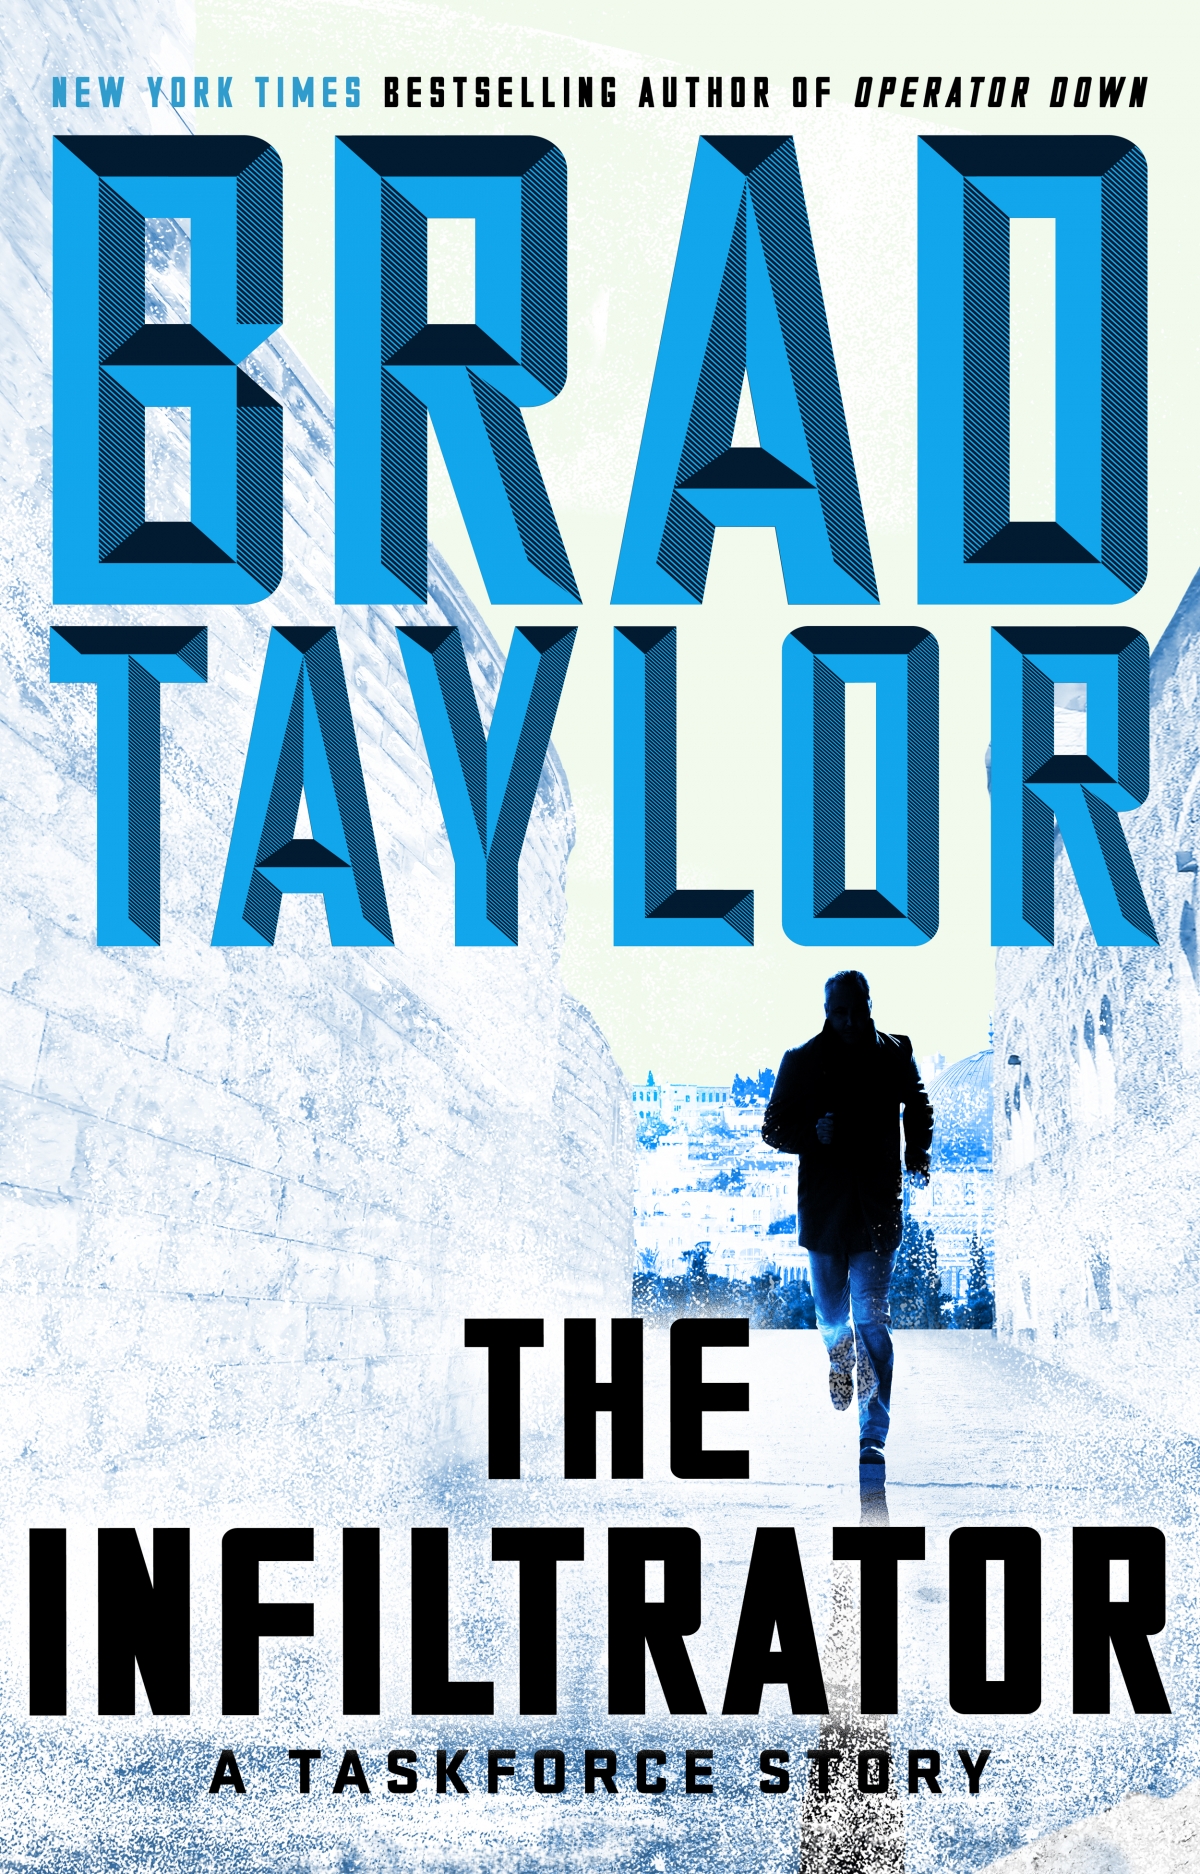 Brad Taylor Author of 17 New York Times Bestselling Thrillers